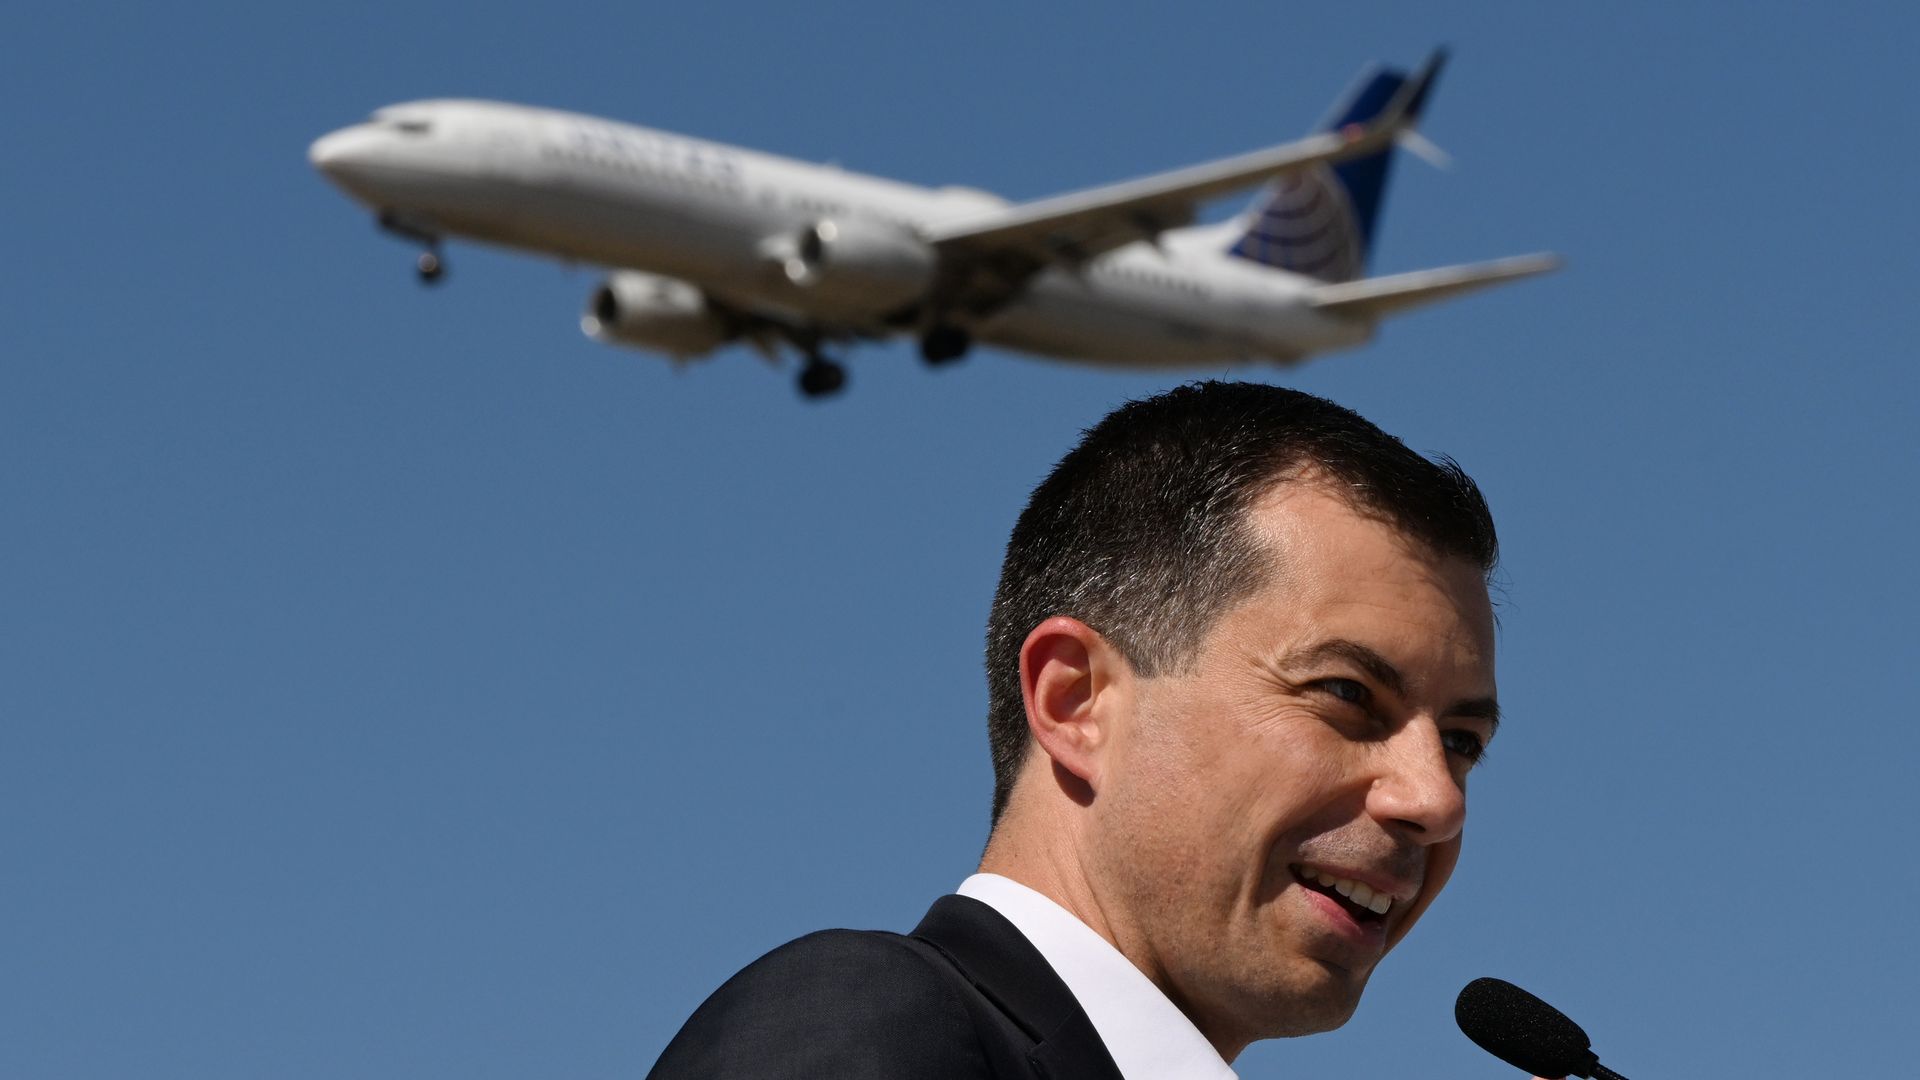 Transportation Secretary Pete Buttigieg visited Denver International Airport on Tuesday to see updated lights for airfield safety. Photo: RJ Sangosti/Denver Post via Getty Images